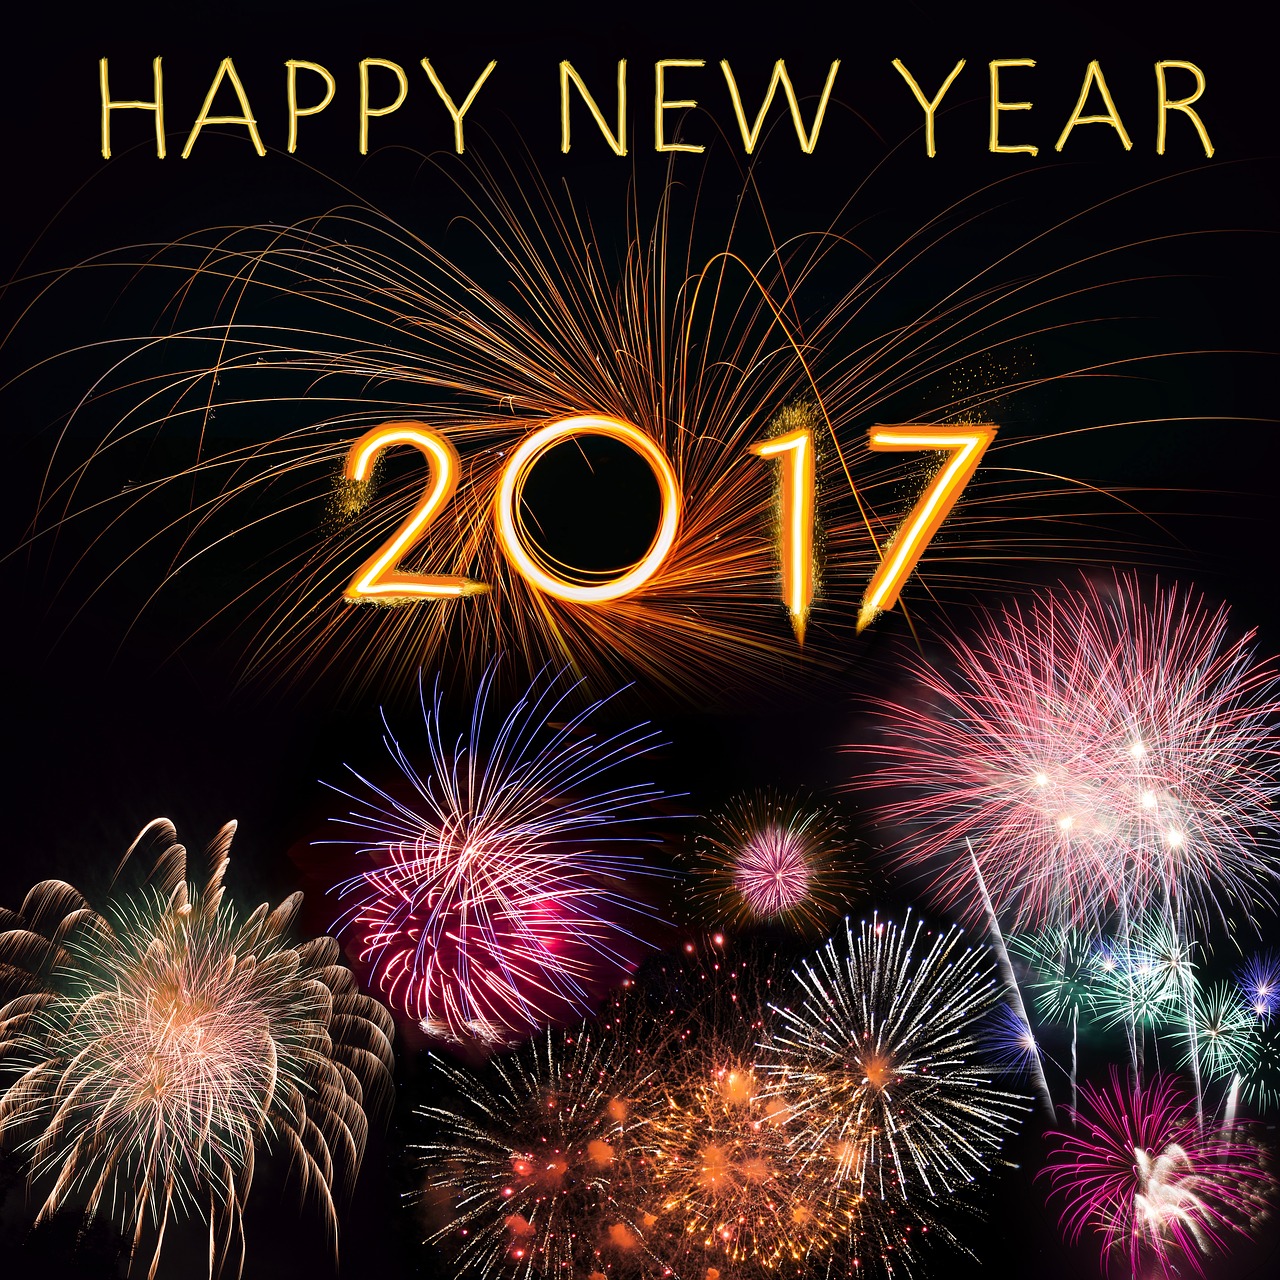 Happy New Year, 2017 is on its way, Good year or bad year